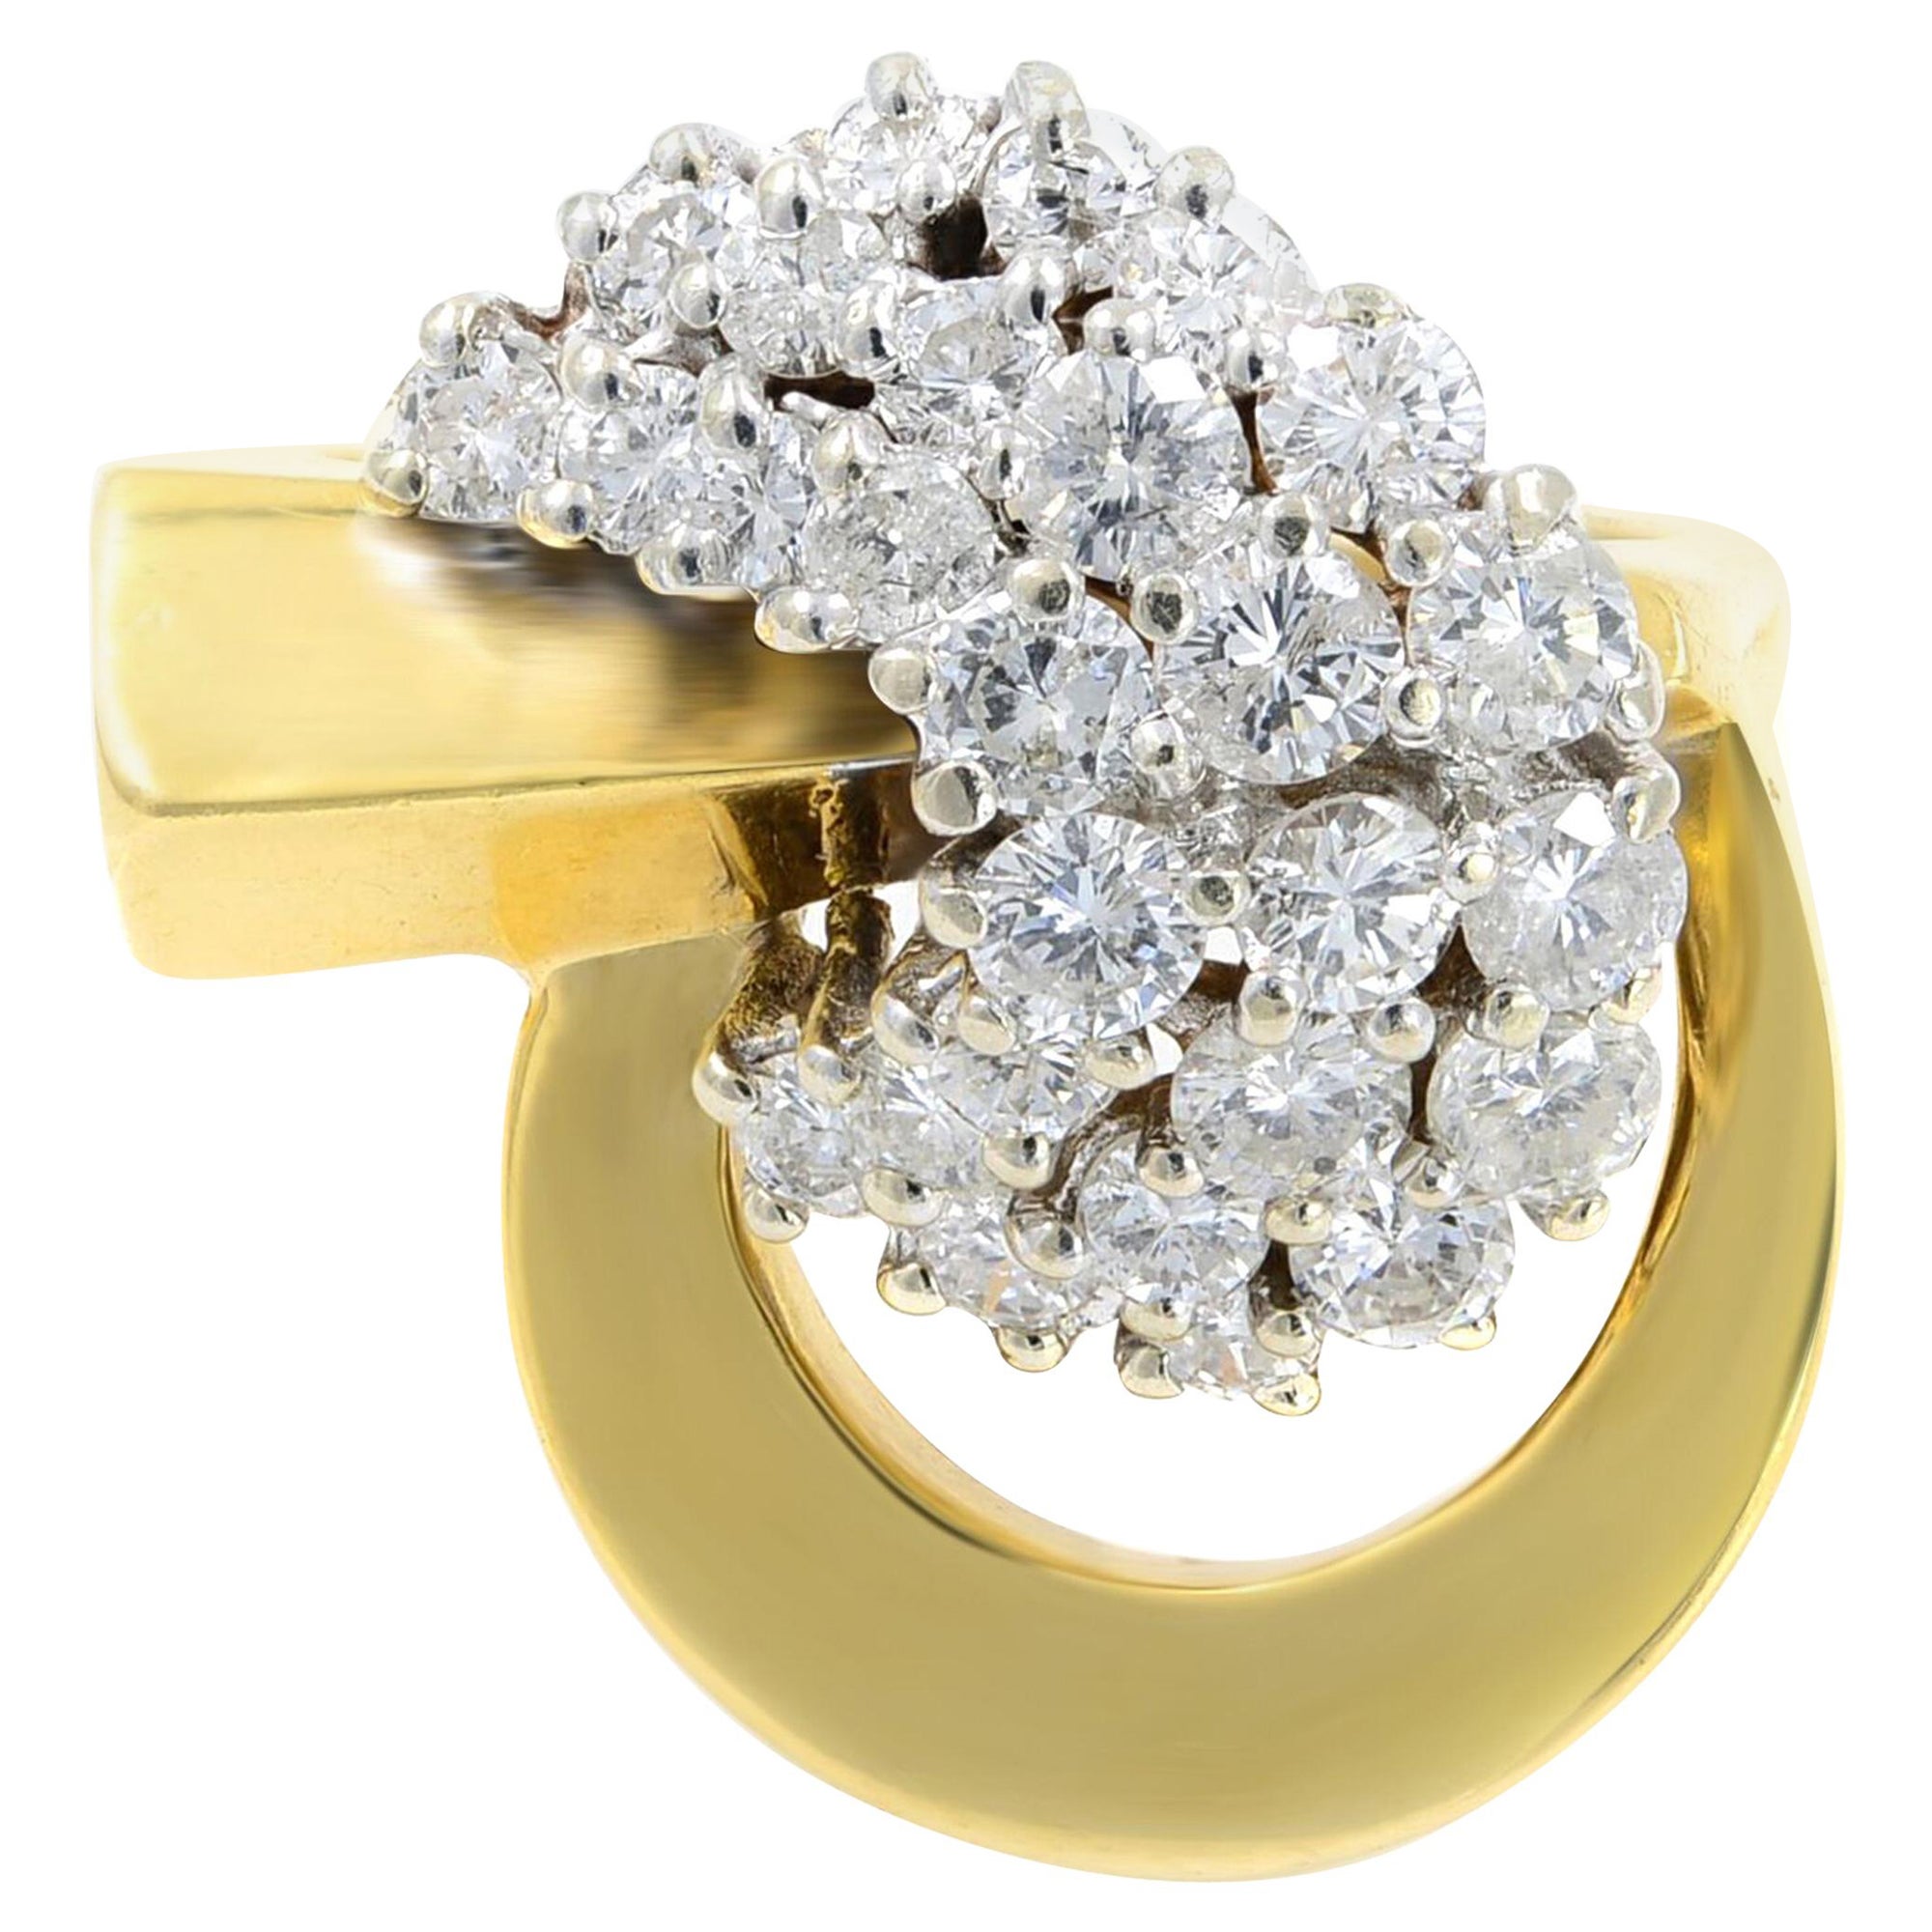 Vintage Round Cut Diamond Cocktail Ring 18K Yellow Gold 1.65Cttw For Sale